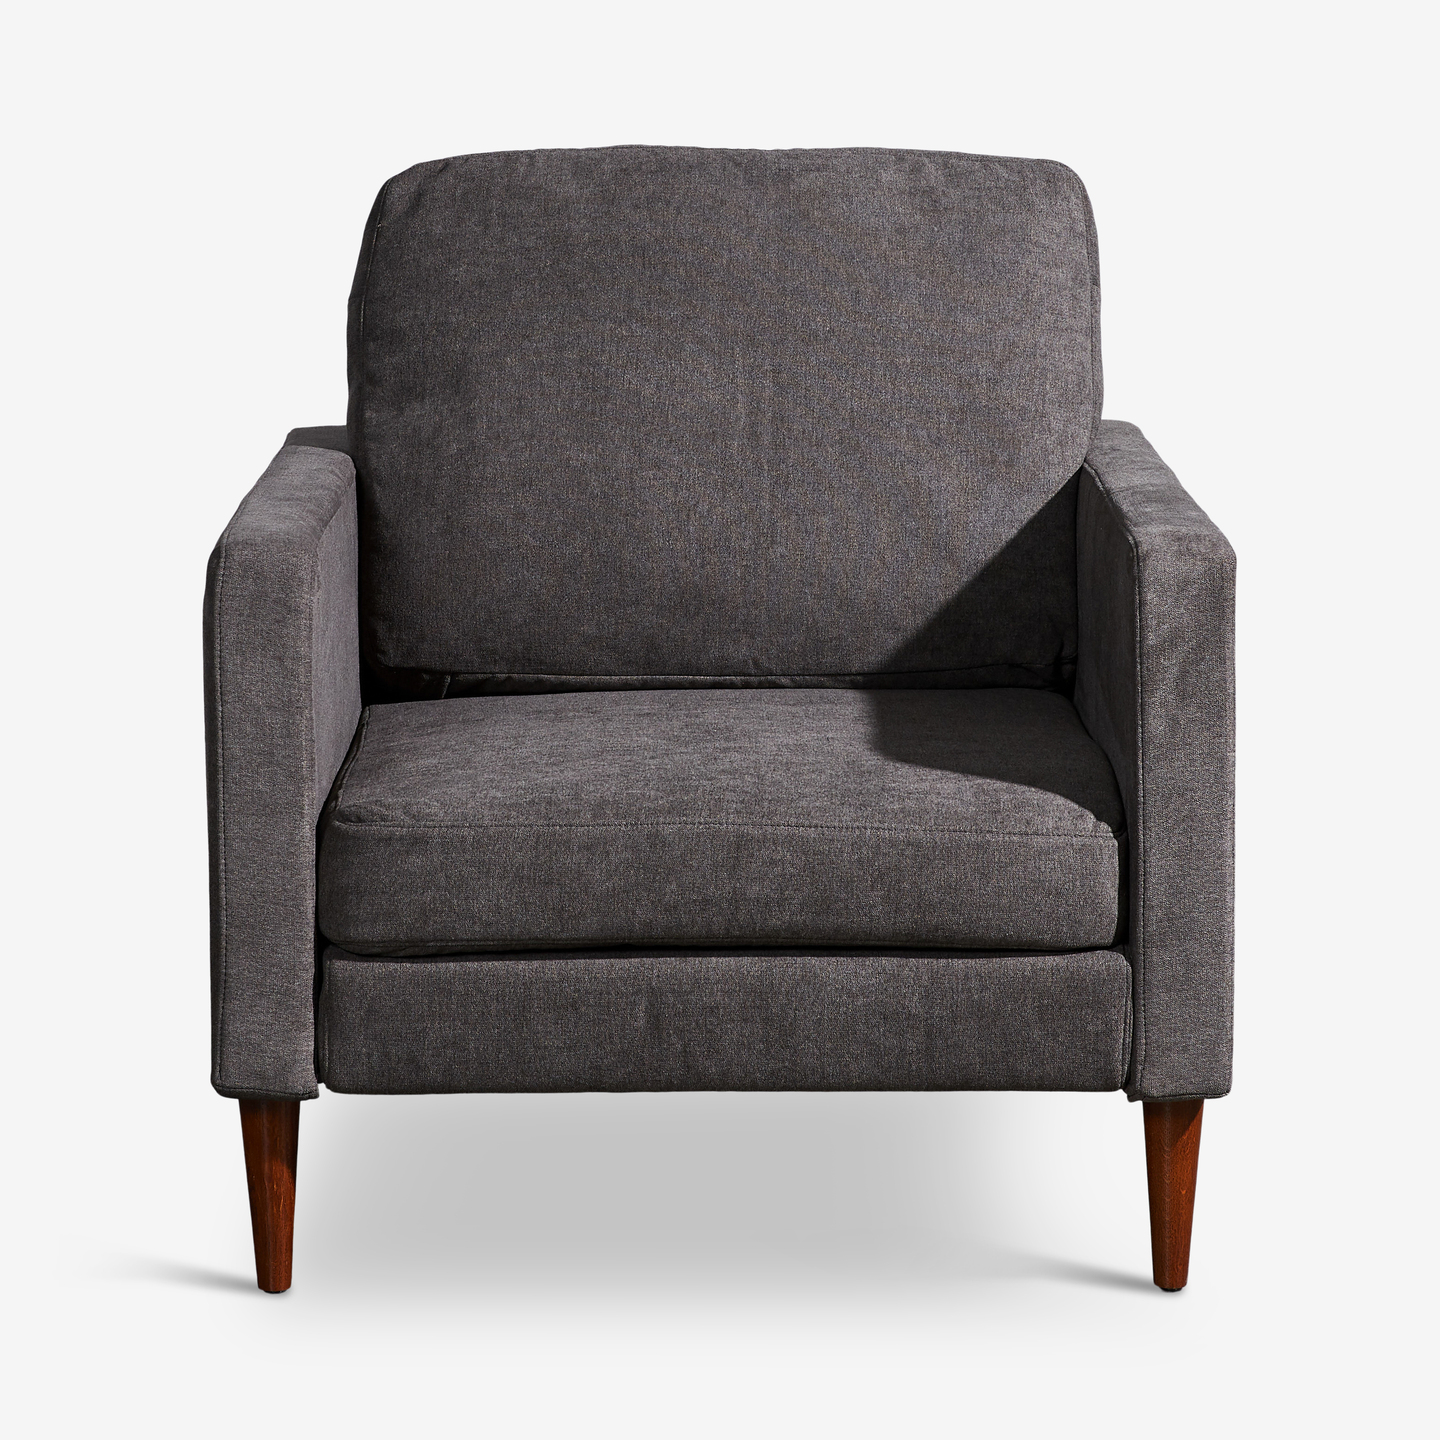 343_Campaign-Chair-Flint-Grey_Flat-Front 2020